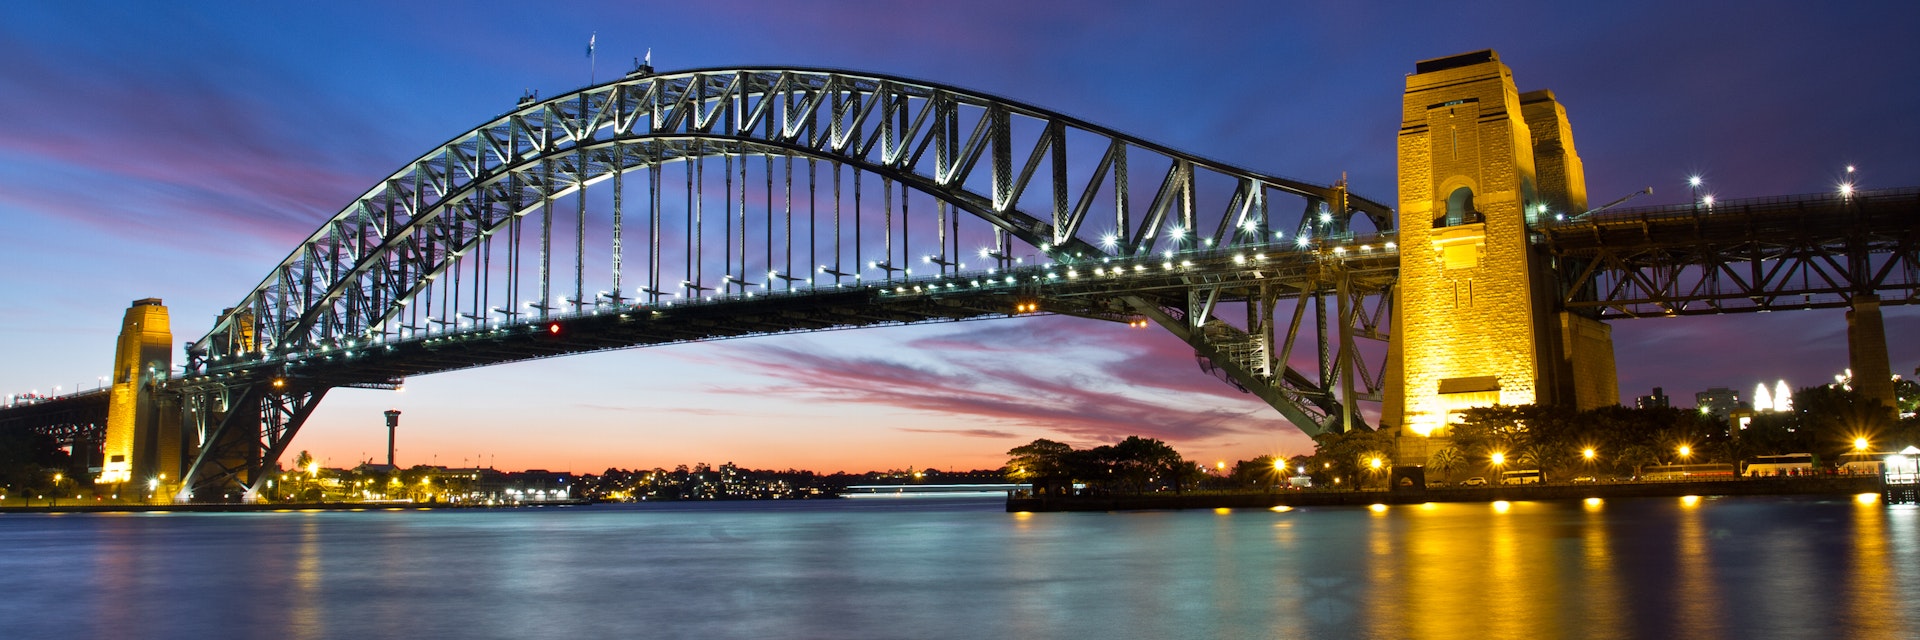 500px Photo ID: 90468683 - The worlds most famous Bridge on the worlds most famous Harbour..Sydney Harbour. ..This makes for a perfect backdrop for the New Years Eve Fireworks